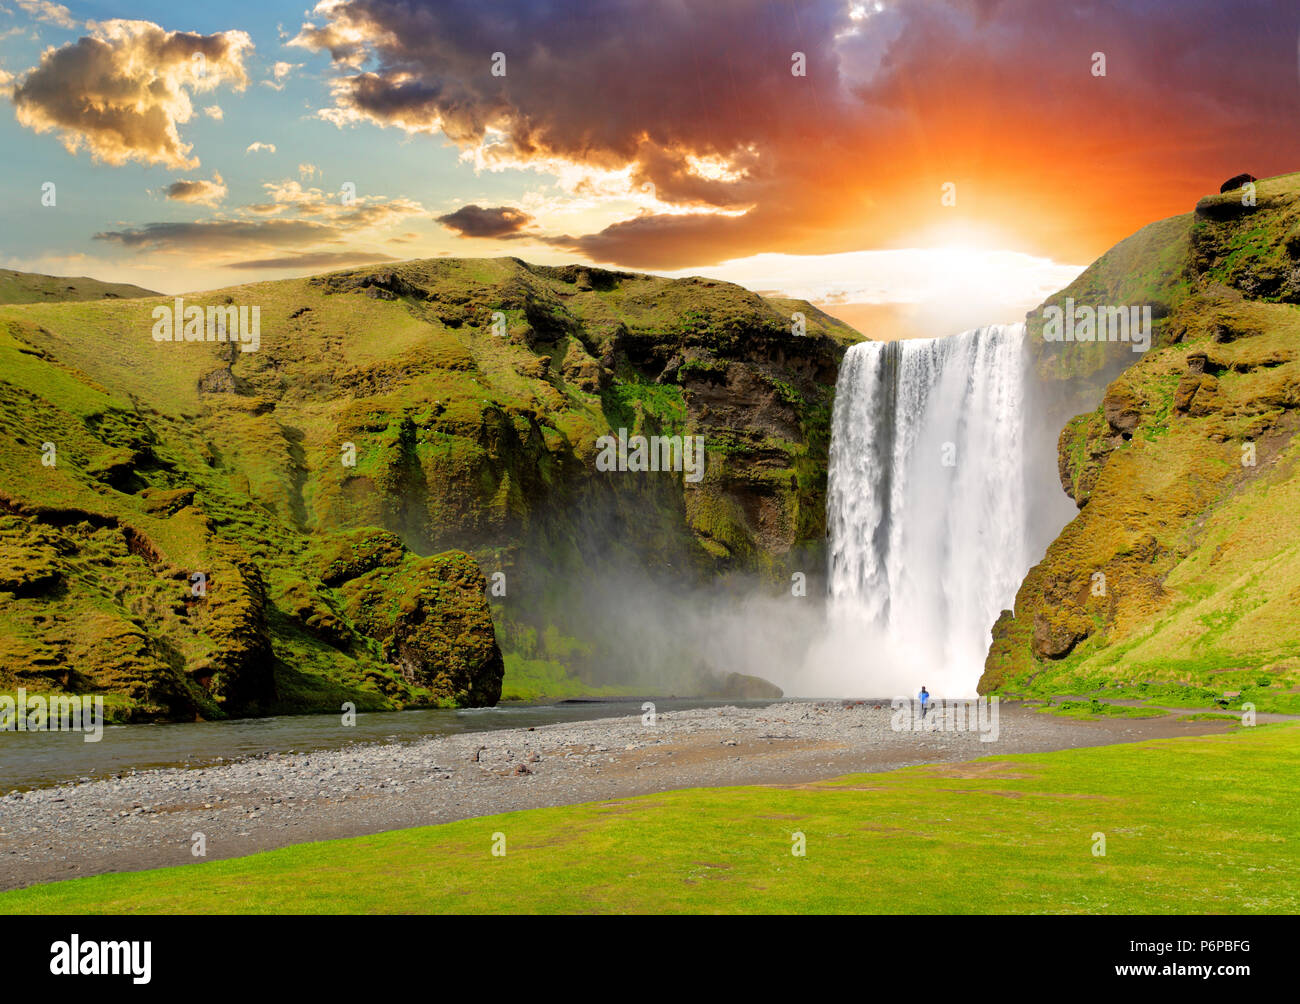 famous waterfall Skogafoss in Iceland at sunset Stock Photo